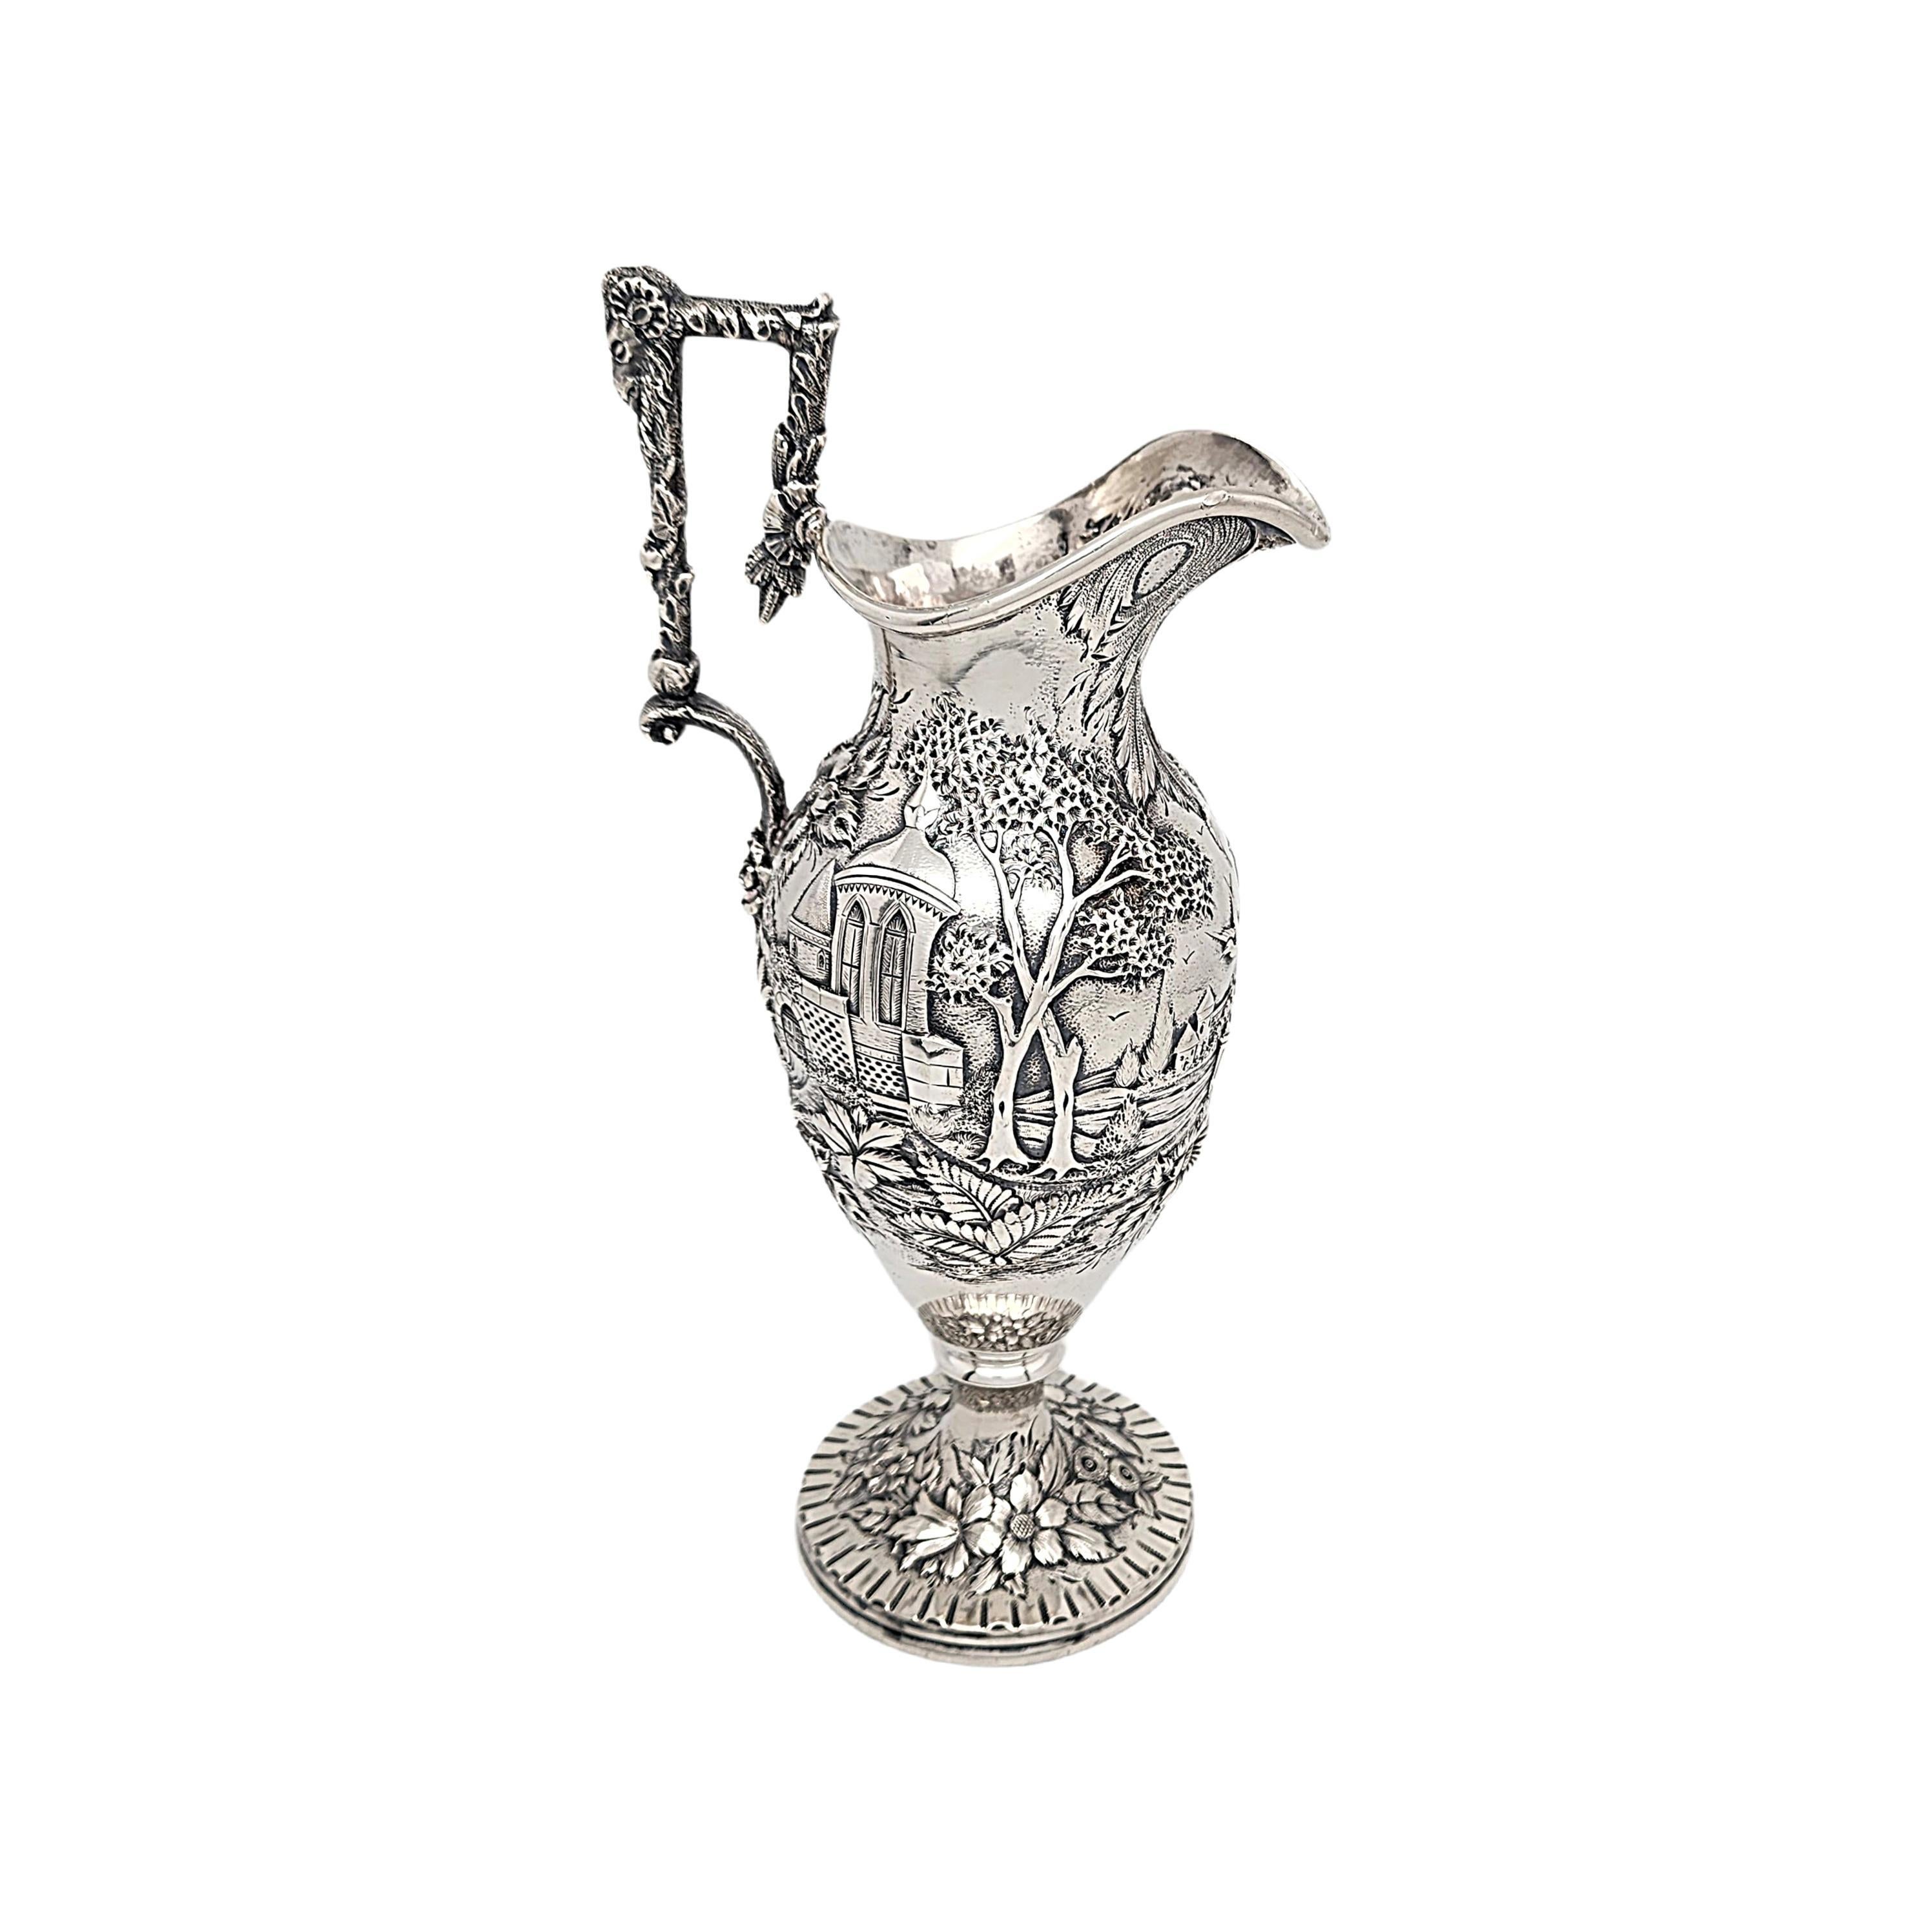 Antique S Kirk & Son Sterling Silver 112 Castle Landscape Creamer #16532 In Good Condition For Sale In Washington Depot, CT